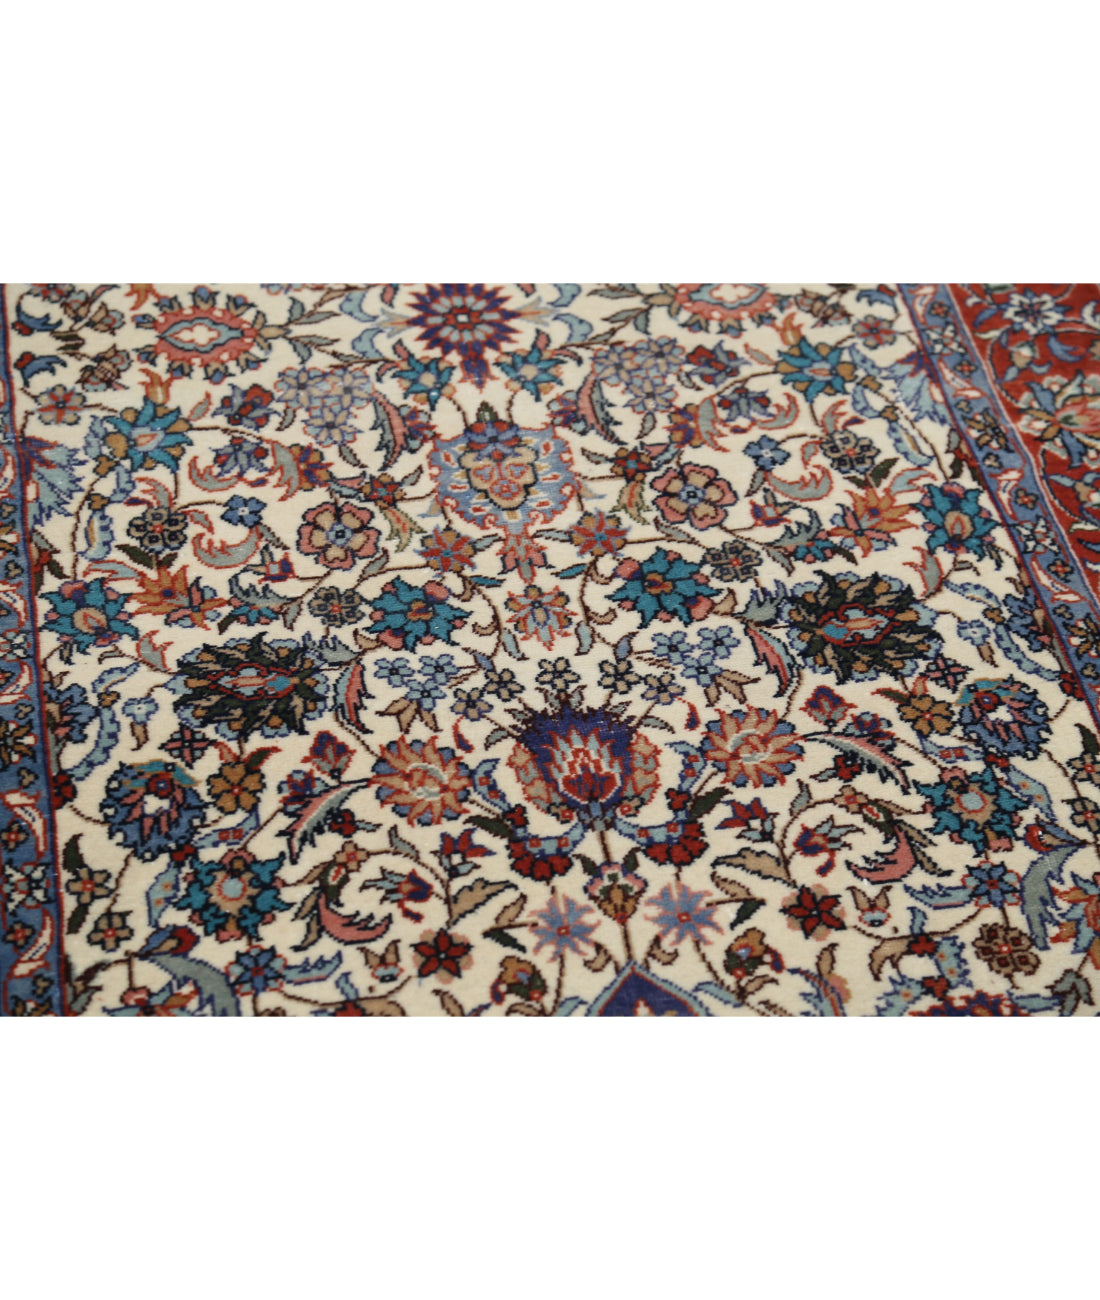 Heritage 2'8'' X 14'3'' Hand-Knotted Wool Rug 2'8'' x 14'3'' (80 X 428) / Ivory / Red